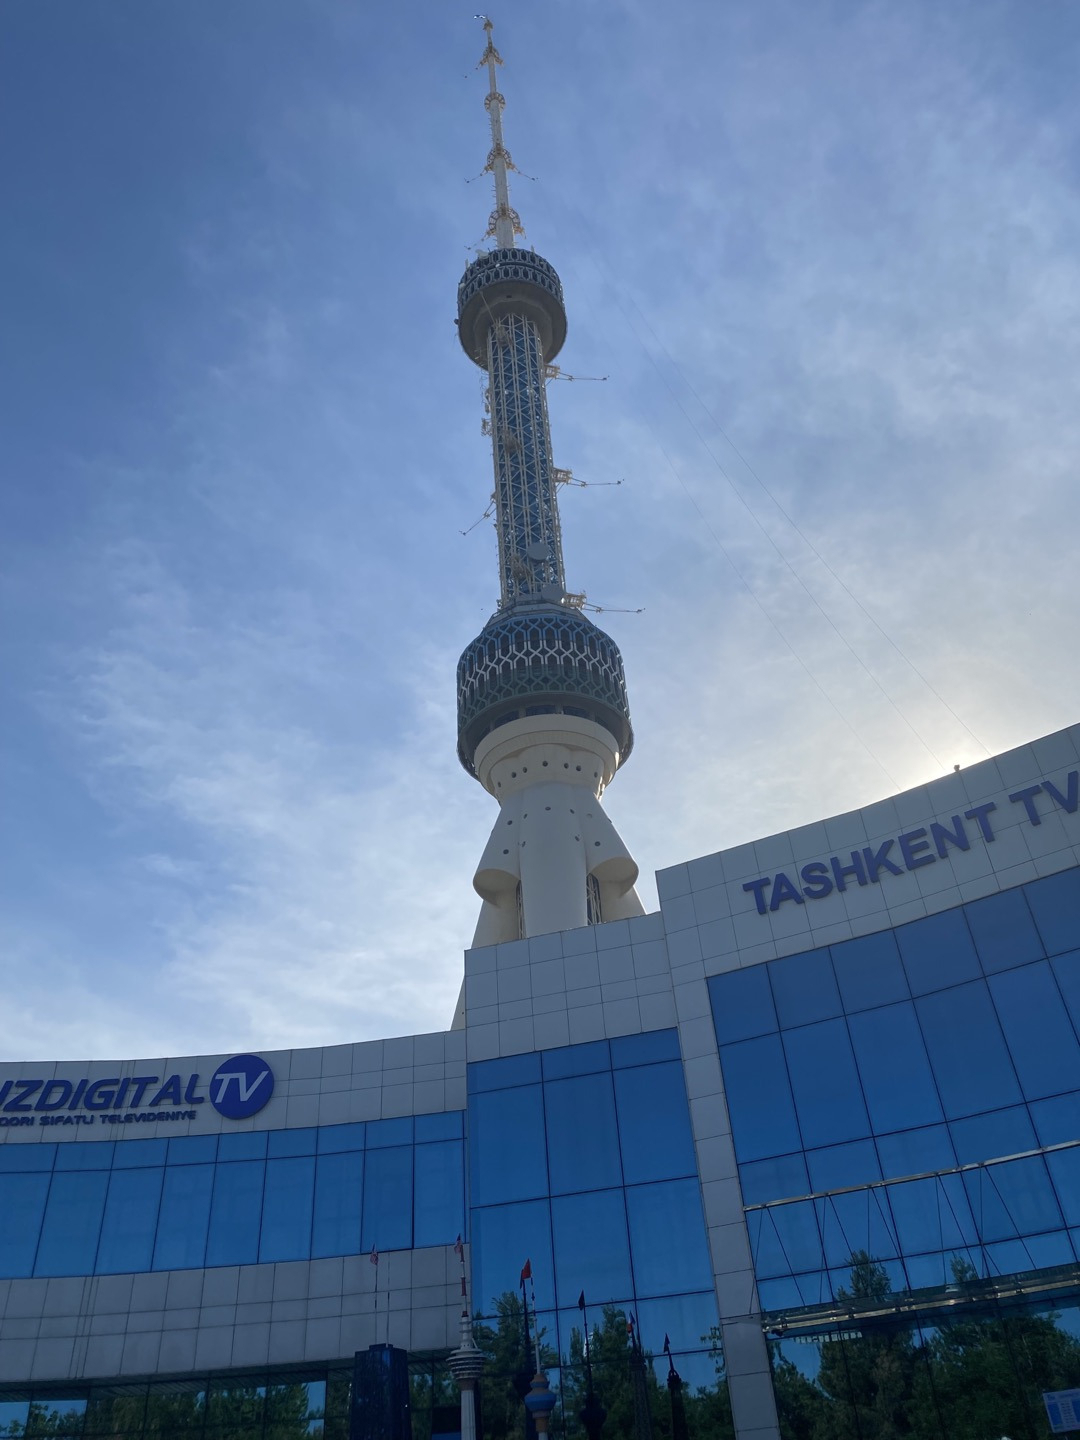 TV Tower of Tashkent built in 1979 and considered as tallest structure in central Asia.(Sanjay Kumar/The Korea Herald)